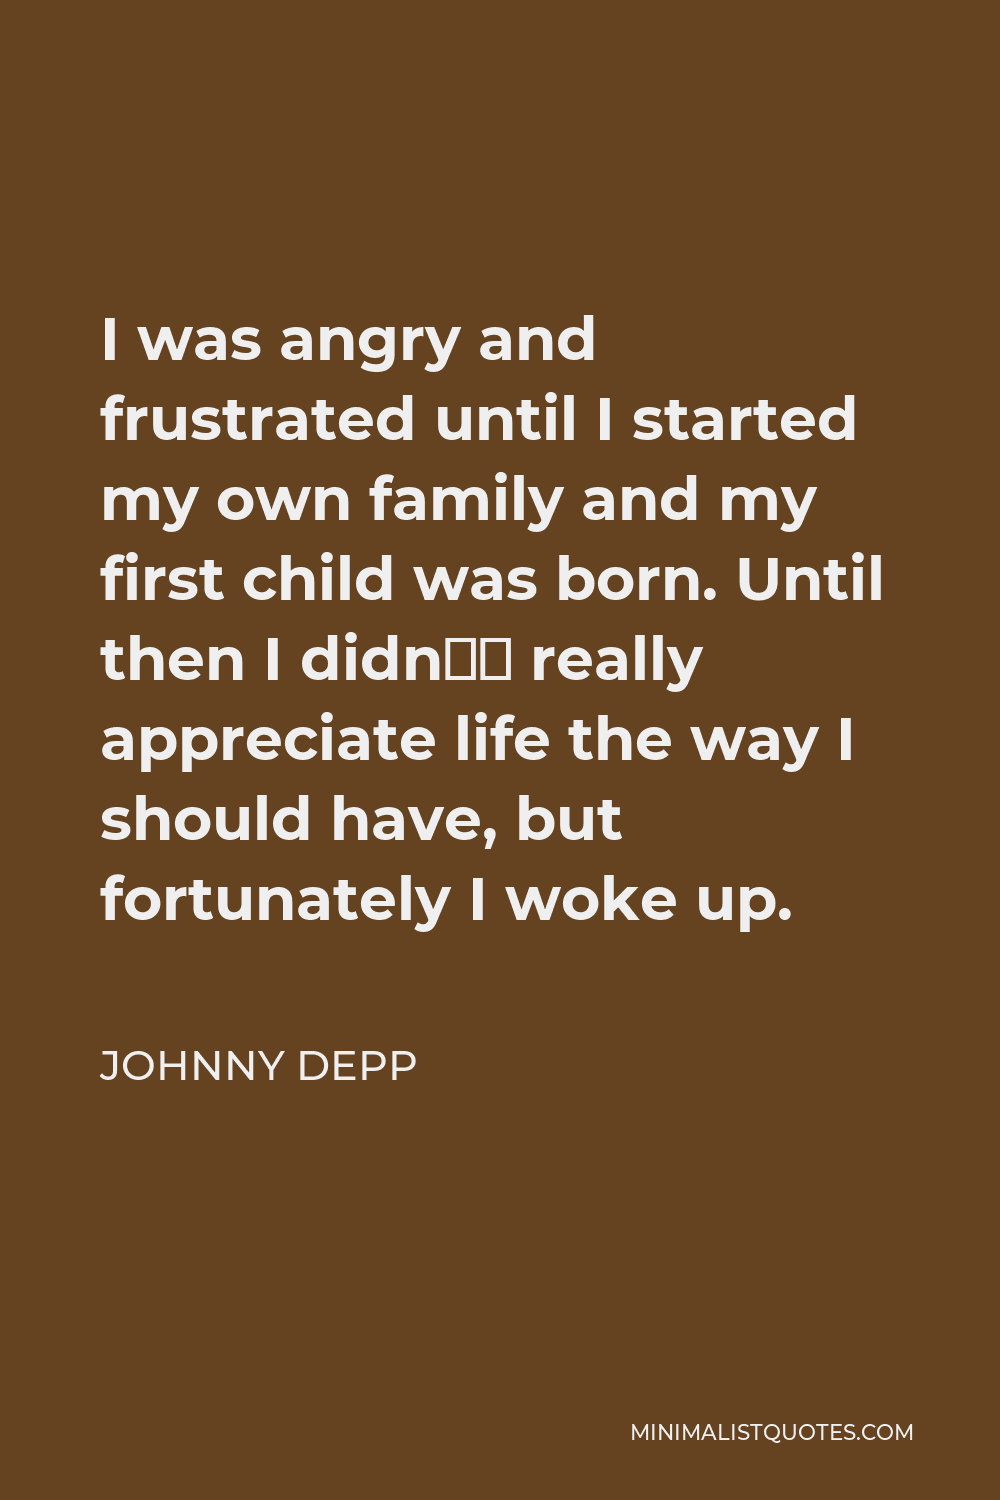 Johnny Depp Quote - I was angry and frustrated until I started my own family and my first child was born. Until then I didn’t really appreciate life the way I should have, but fortunately I woke up.